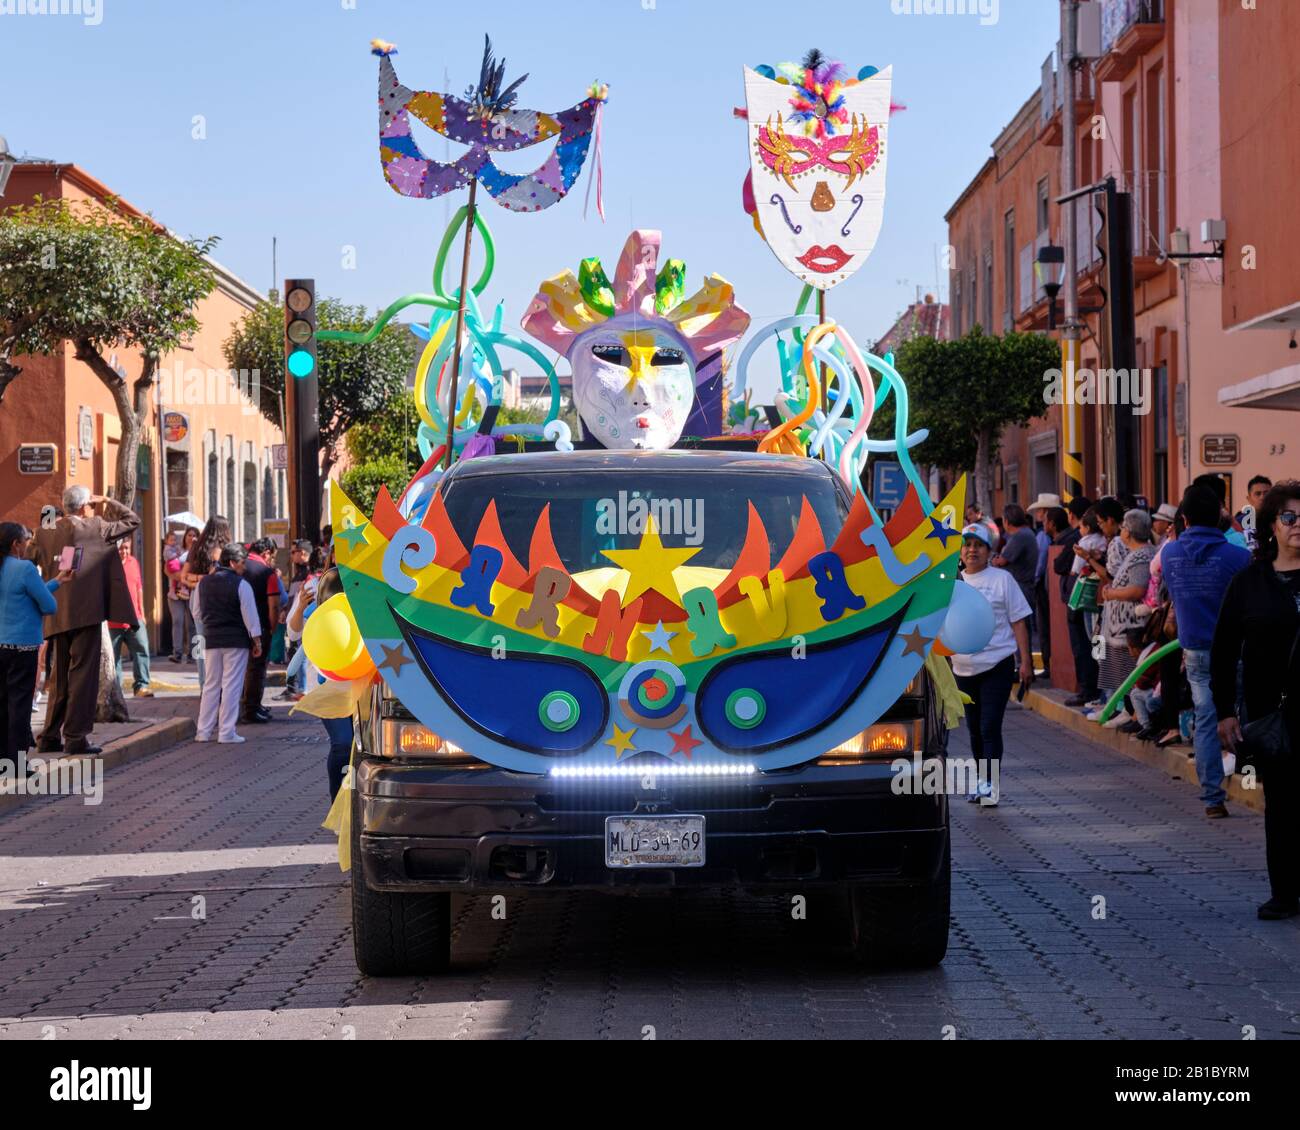 Decorated Float with word Carnaval in the kids parade of the Tlaxcala Carnival featuring Litters of Huehues in traditional Mexican costumes. Stock Photo